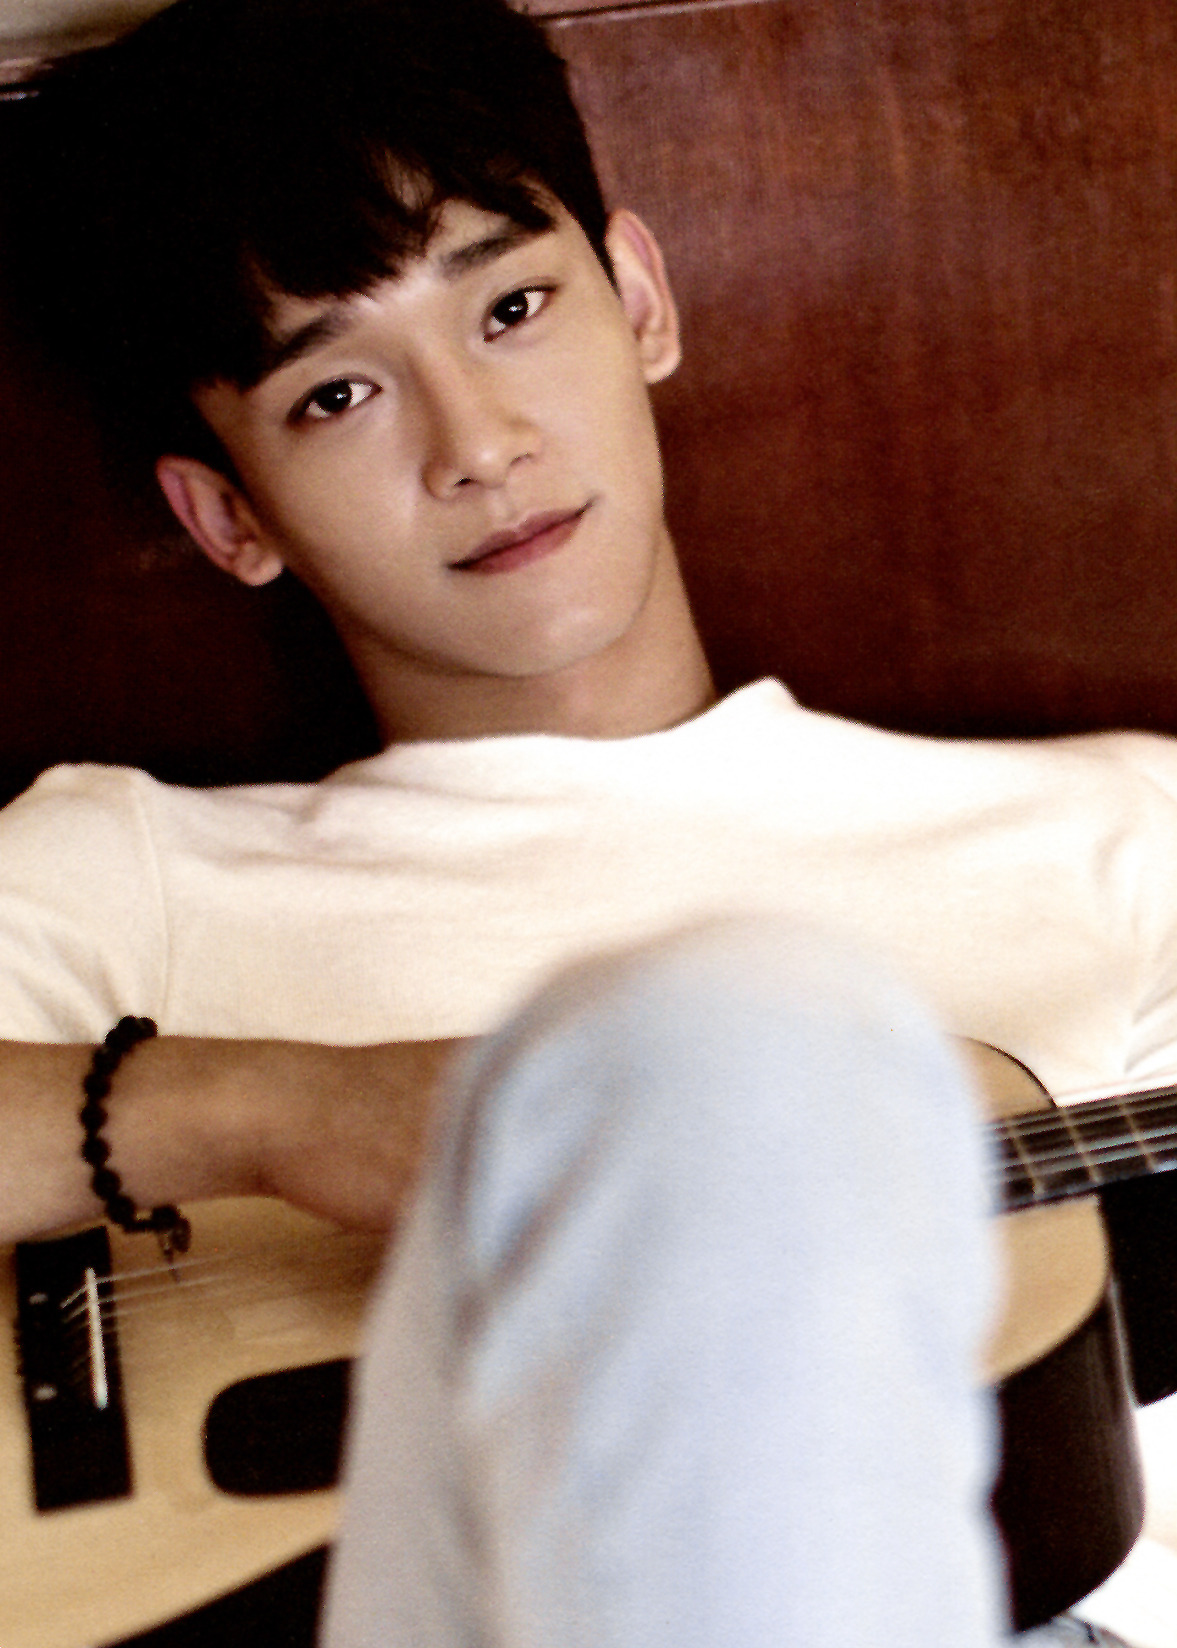 Chen with a guitar